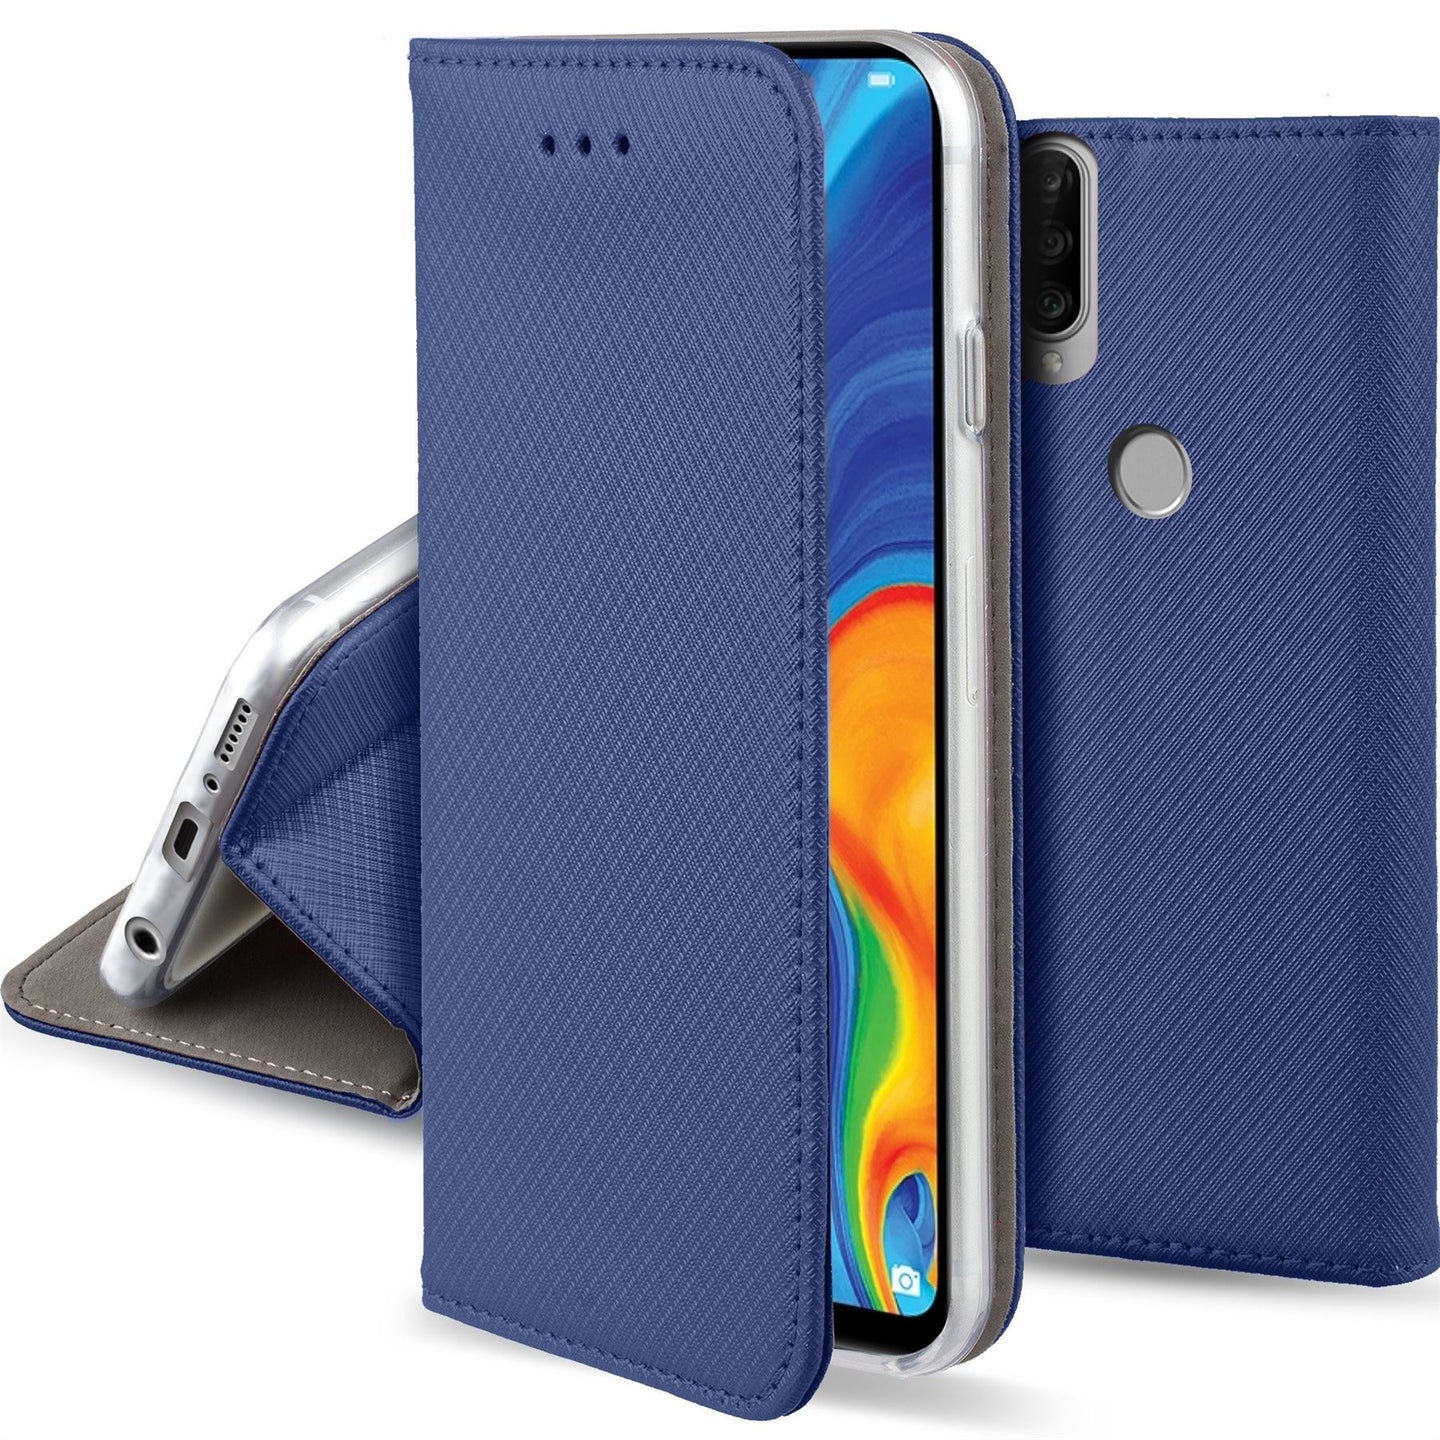 Moozy Case Flip Cover for Huawei P30 Lite, Dark Blue - Smart Magnetic Flip Case with Card Holder and Stand